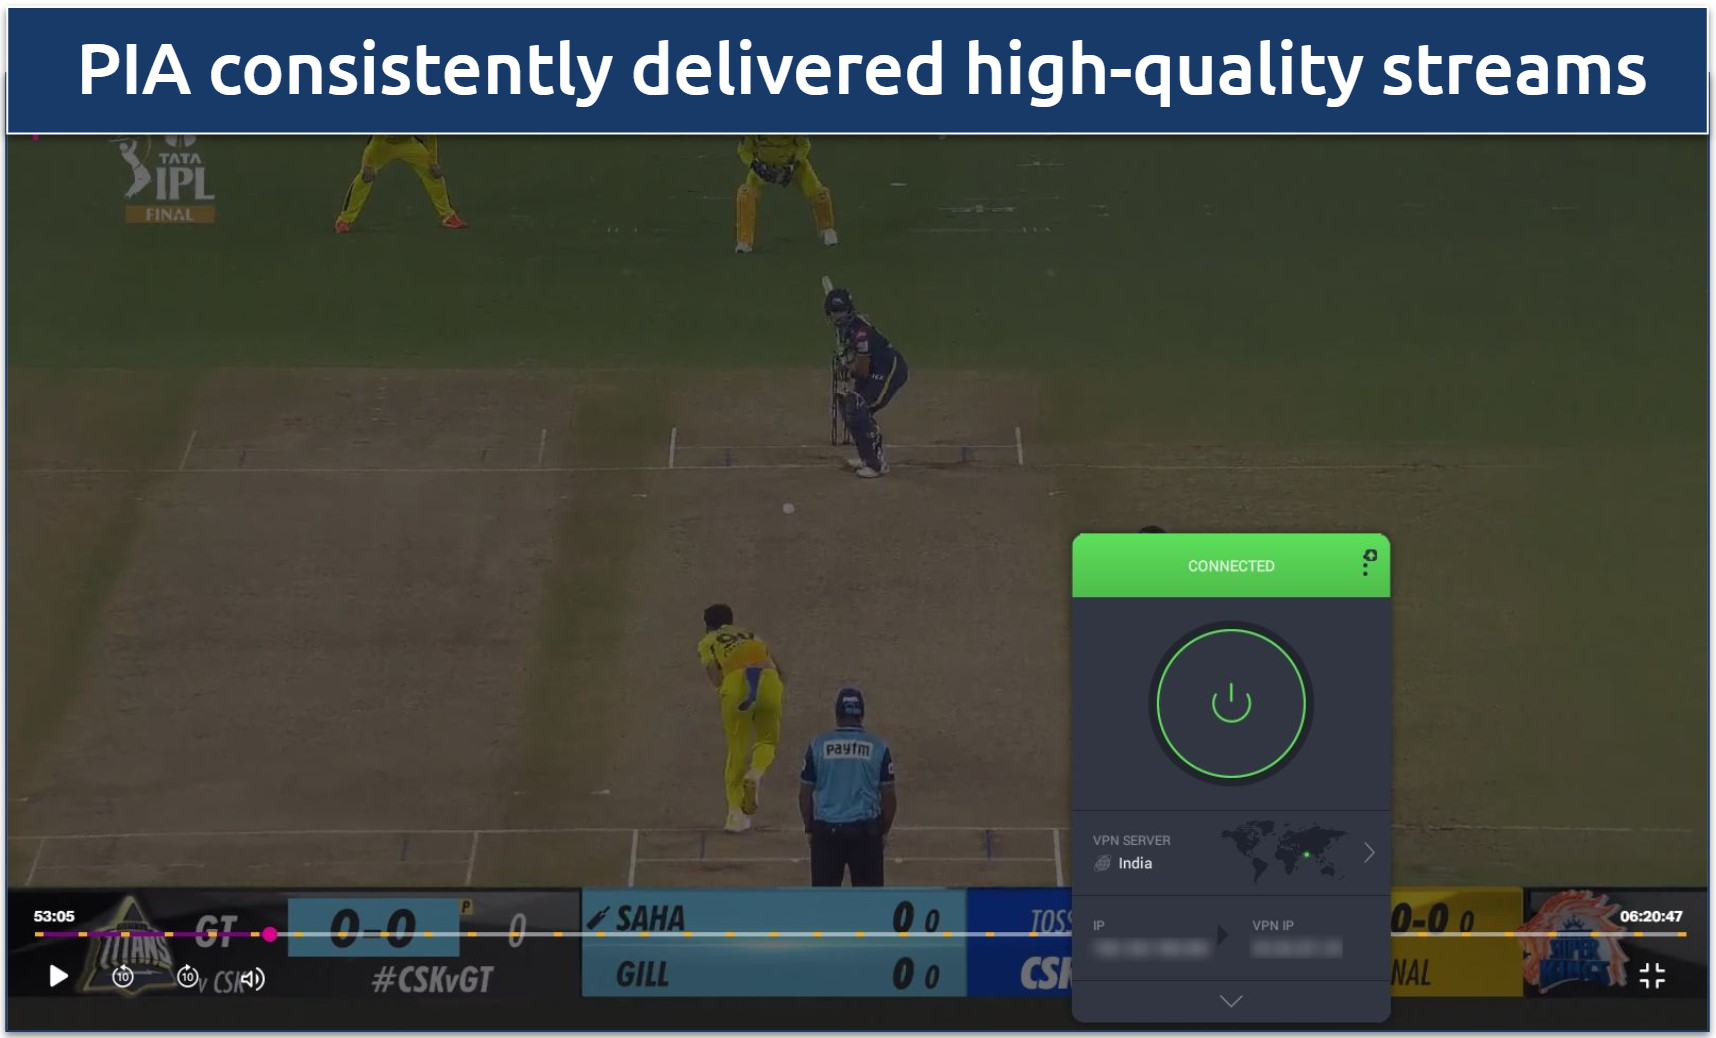 Screenshot of the IPL playing on JioCinema with PIA connected to the India server